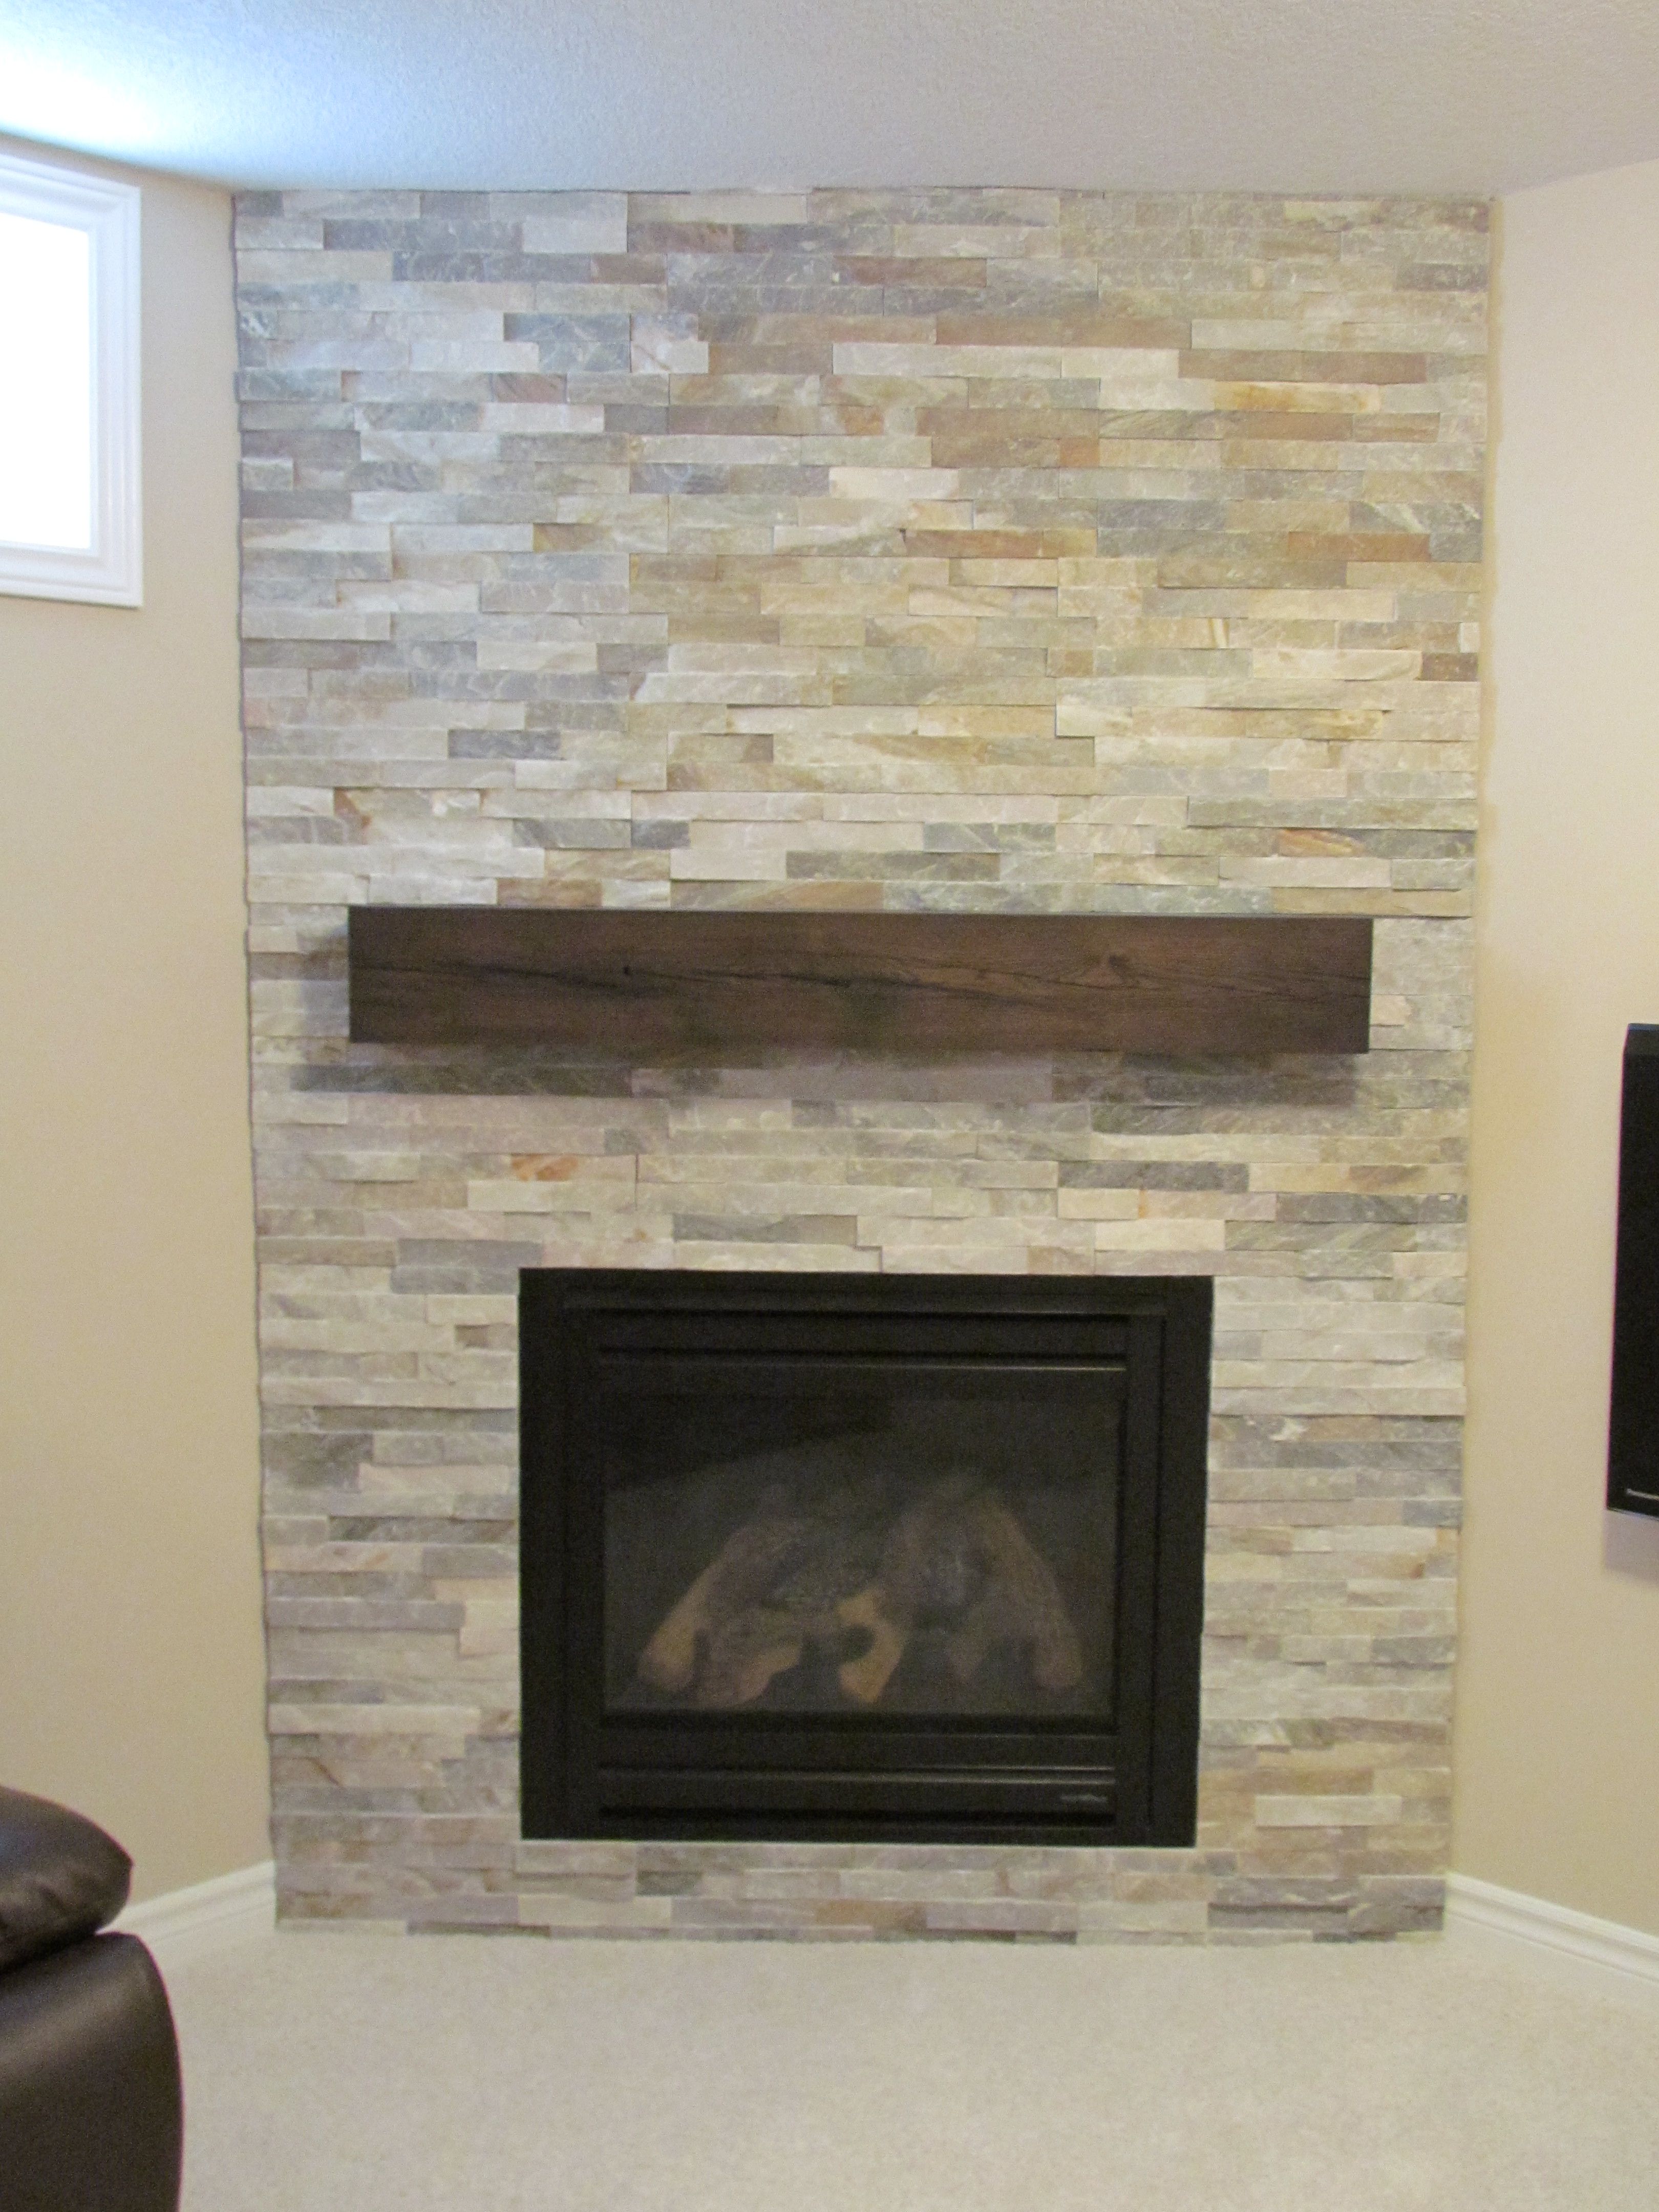 Rustic Mantels for Stone Fireplaces Inspirational Ledge Stone Fireplace with Rustic Reclaimed Wood Mantel